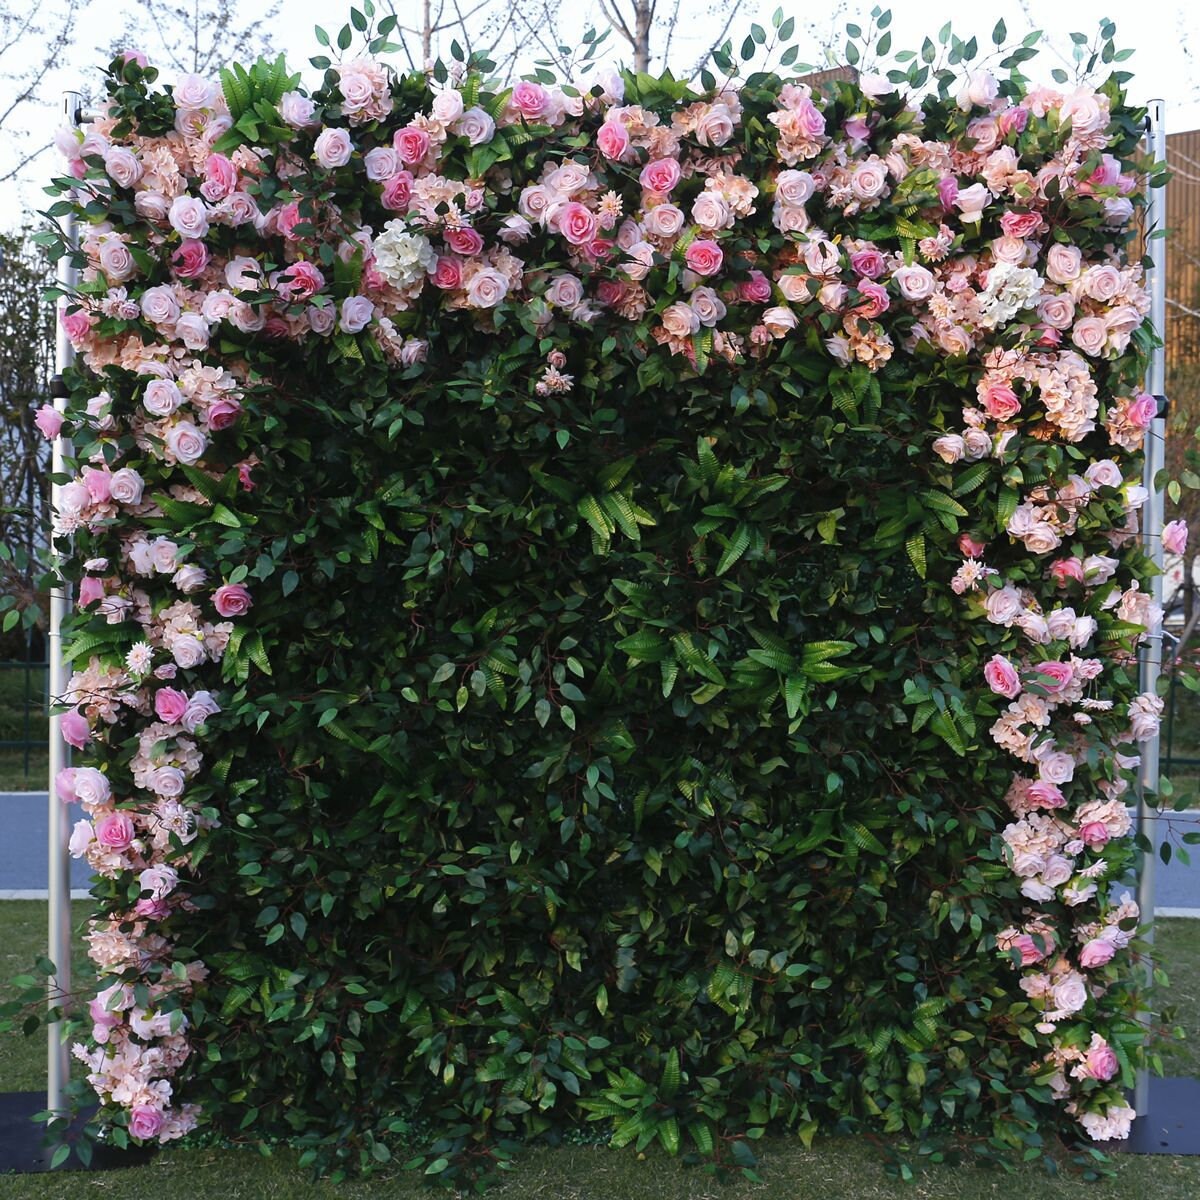 New Arrival Flower Green Plants Wall For Wedding Arrangement Event Salon Party Photography Backdrop Fabric Rolling Up Curtain Fabric Cloth